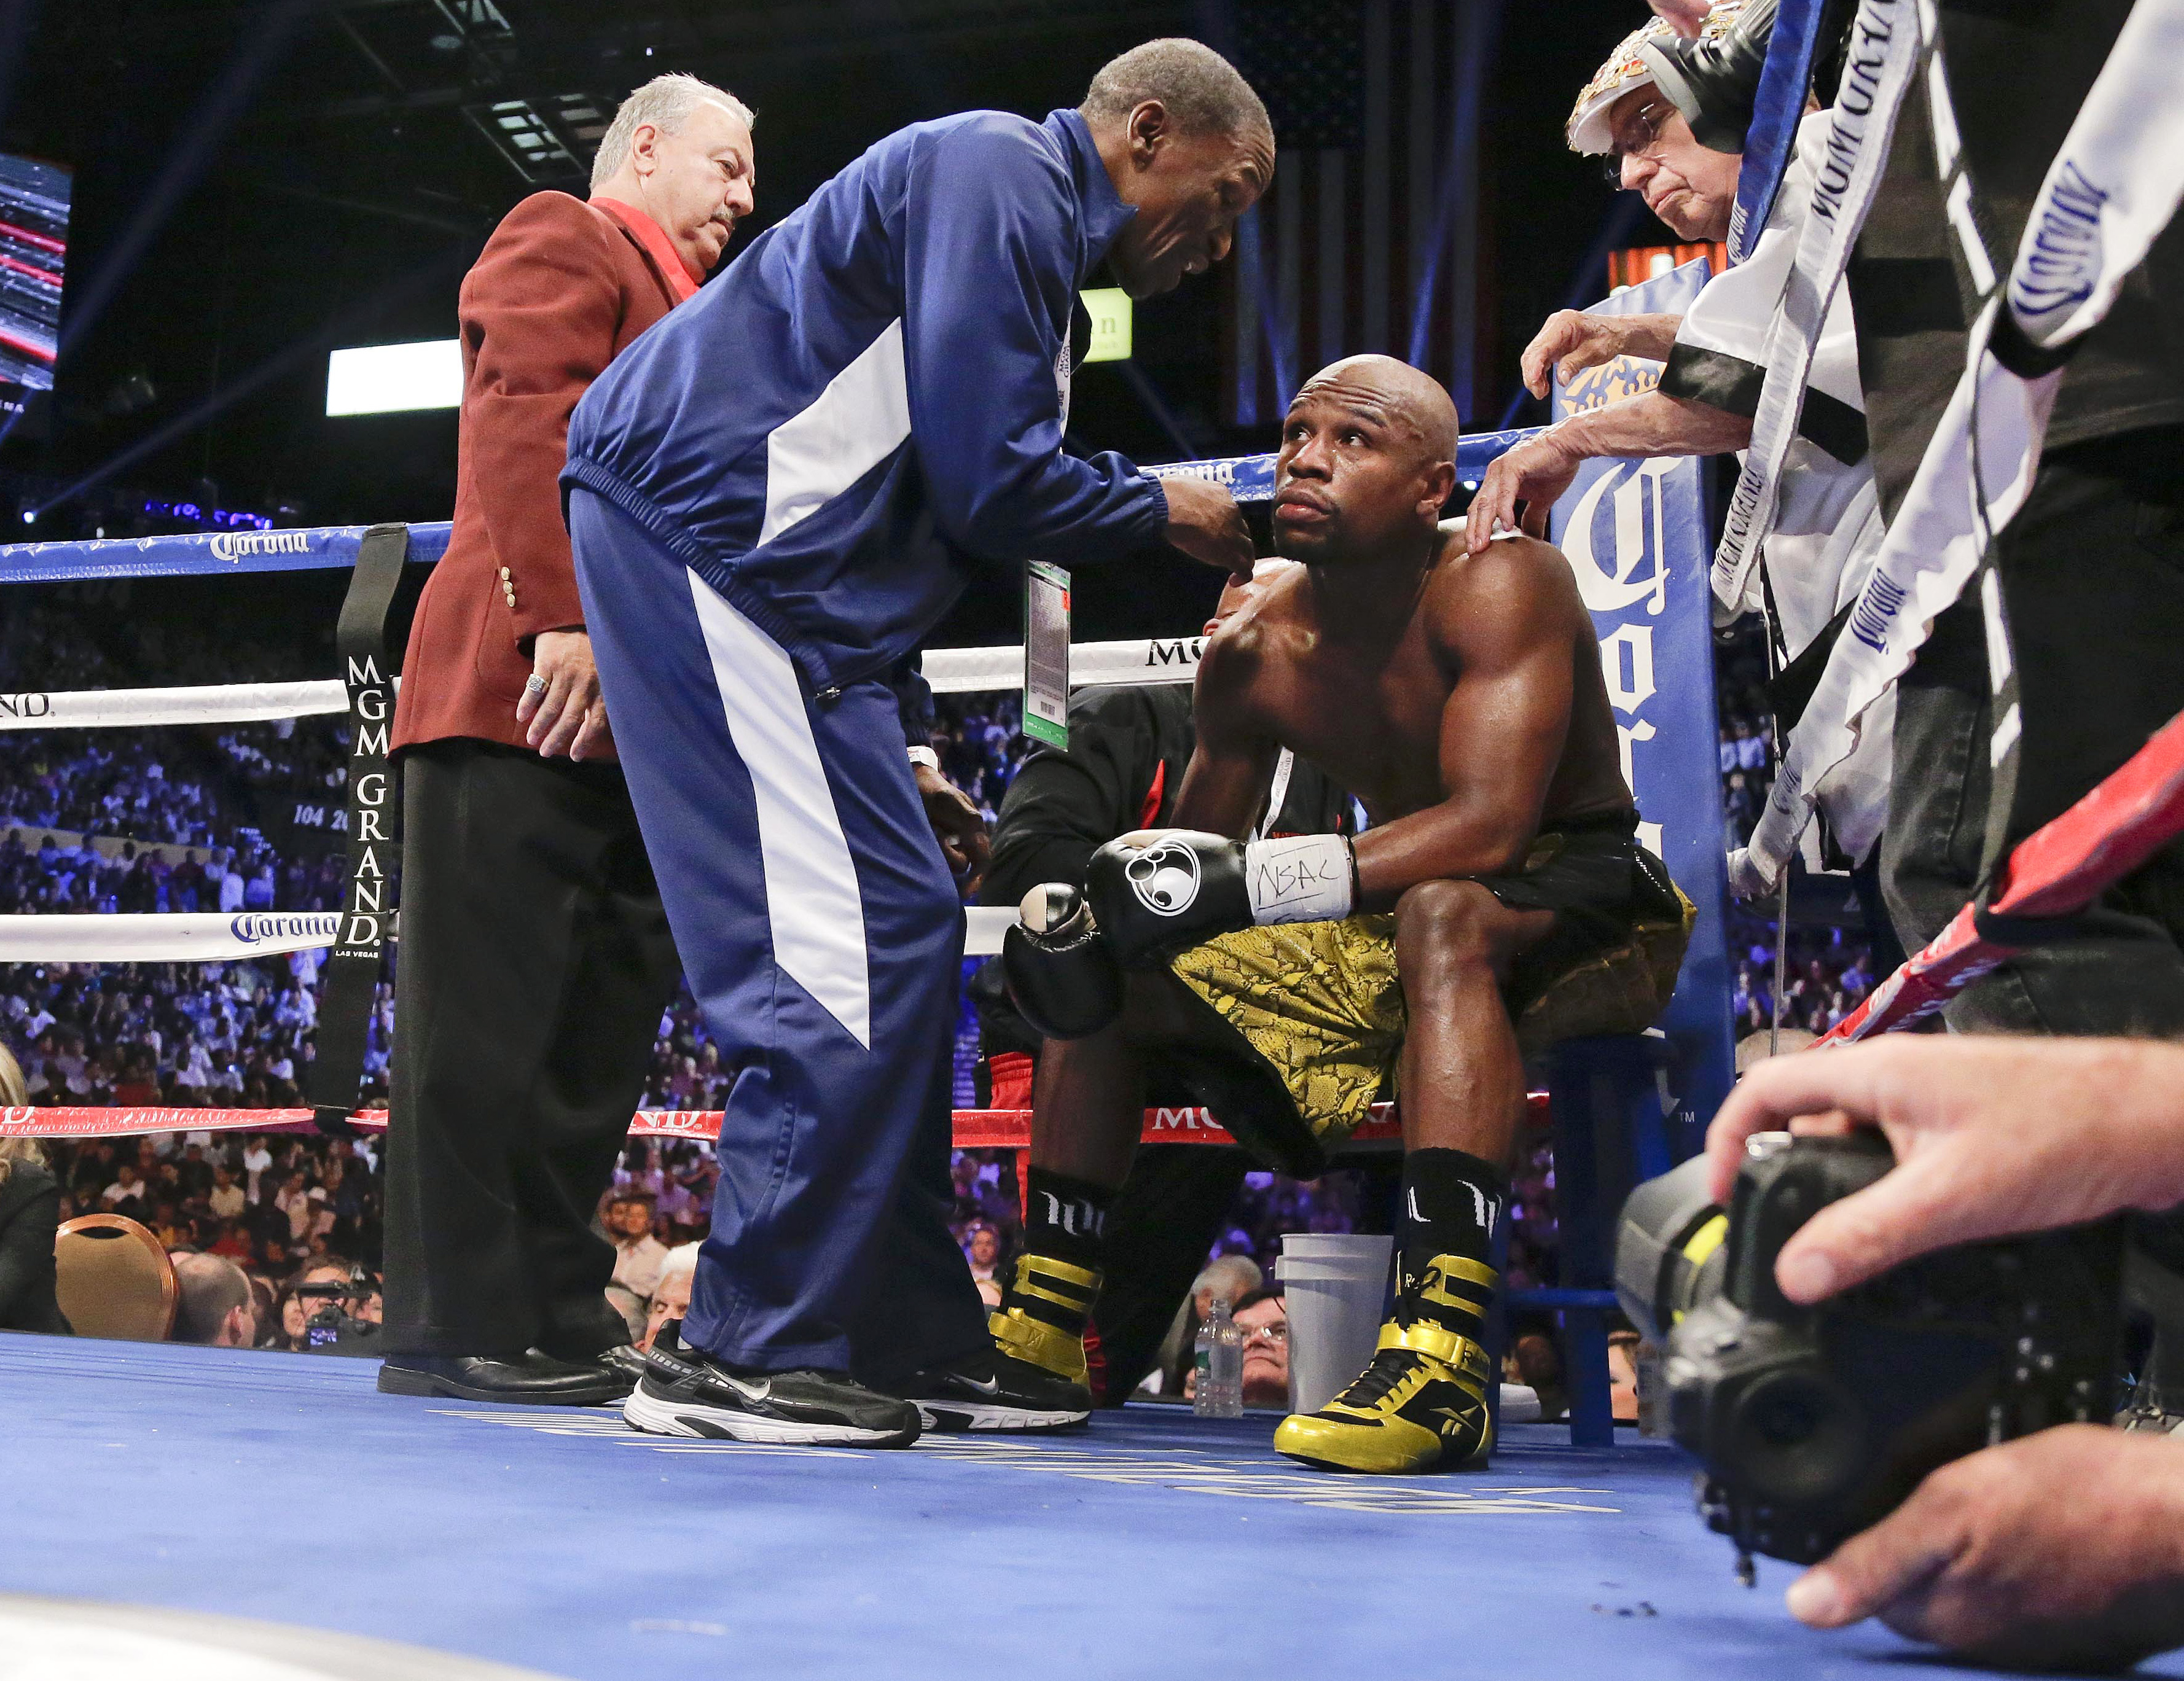 FILE - In this May 4, 2013, file photo, Floyd Mayweather Jr., right, listens to his father and trainer Floyd Mayweather Sr. after the third round against Robert Guerrero during a WBC welterweight title fight,  in Las Vegas. He taught his son to throw punches before he could walk, and he'll be in his corner for the biggest fight of his life against Manny Pacquiao on May 2. The relationship betwee Mayweather Sr. and his son, though, hasn't always been good. (AP Photo/Rick Bowmer, File)